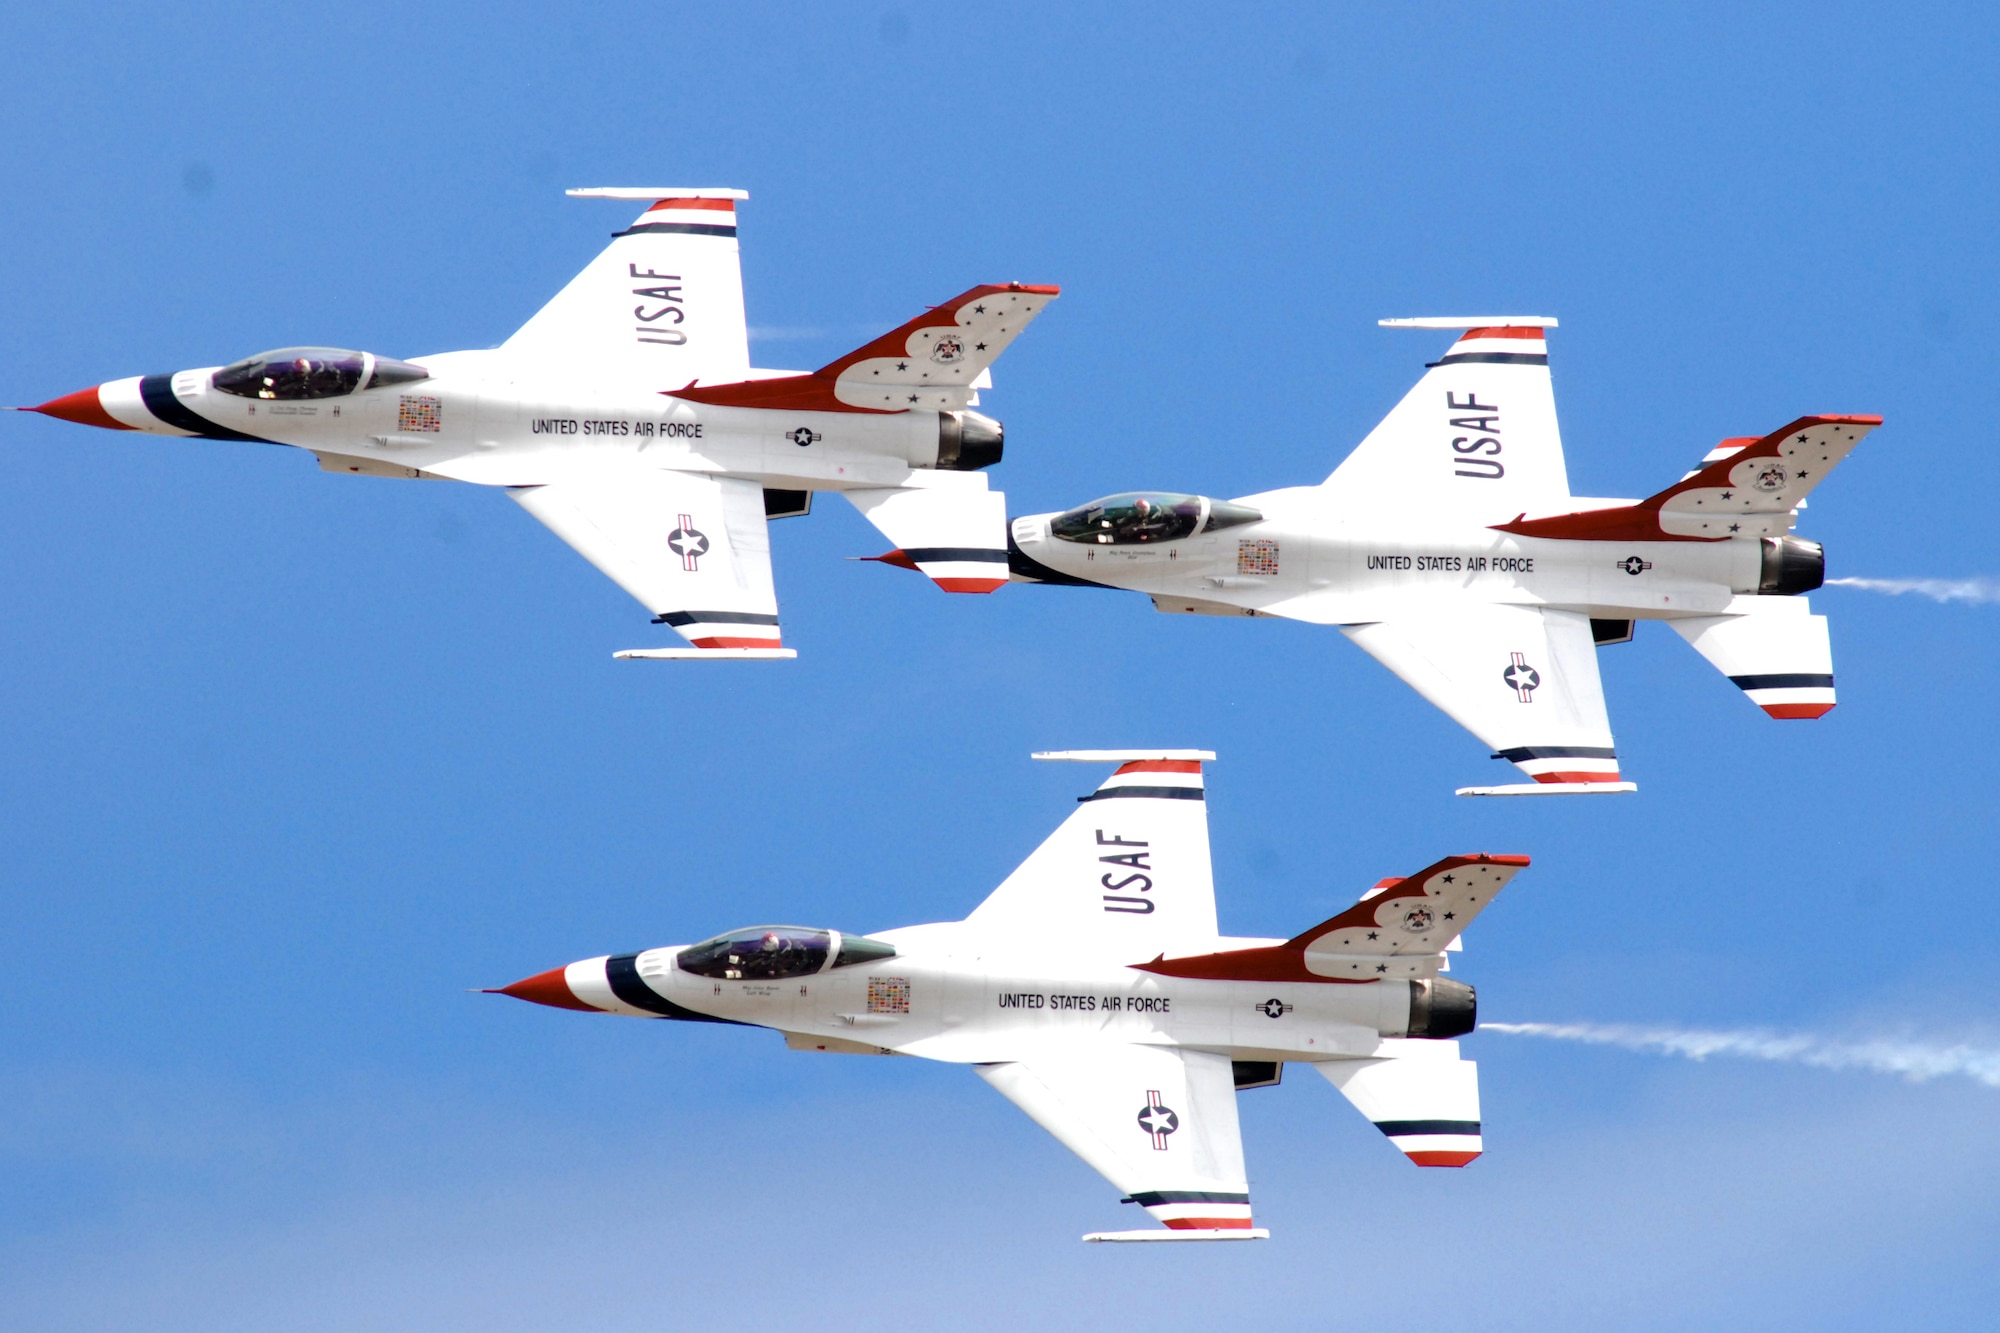 The U.S. Air Force Demonstration Squadron Thunderbirds practice their performance over Hickam Air Force Base, Hawaii, for the "Wings Over the Pacific" open house Sept. 18, 2009. The Thunderbirds demonstrate the capabilities of the F-16 Fighting Falcon by performing combat maneuvers during their aerial demonstration. (U.S. Air Force photo/Staff Sgt. Mike Meares)